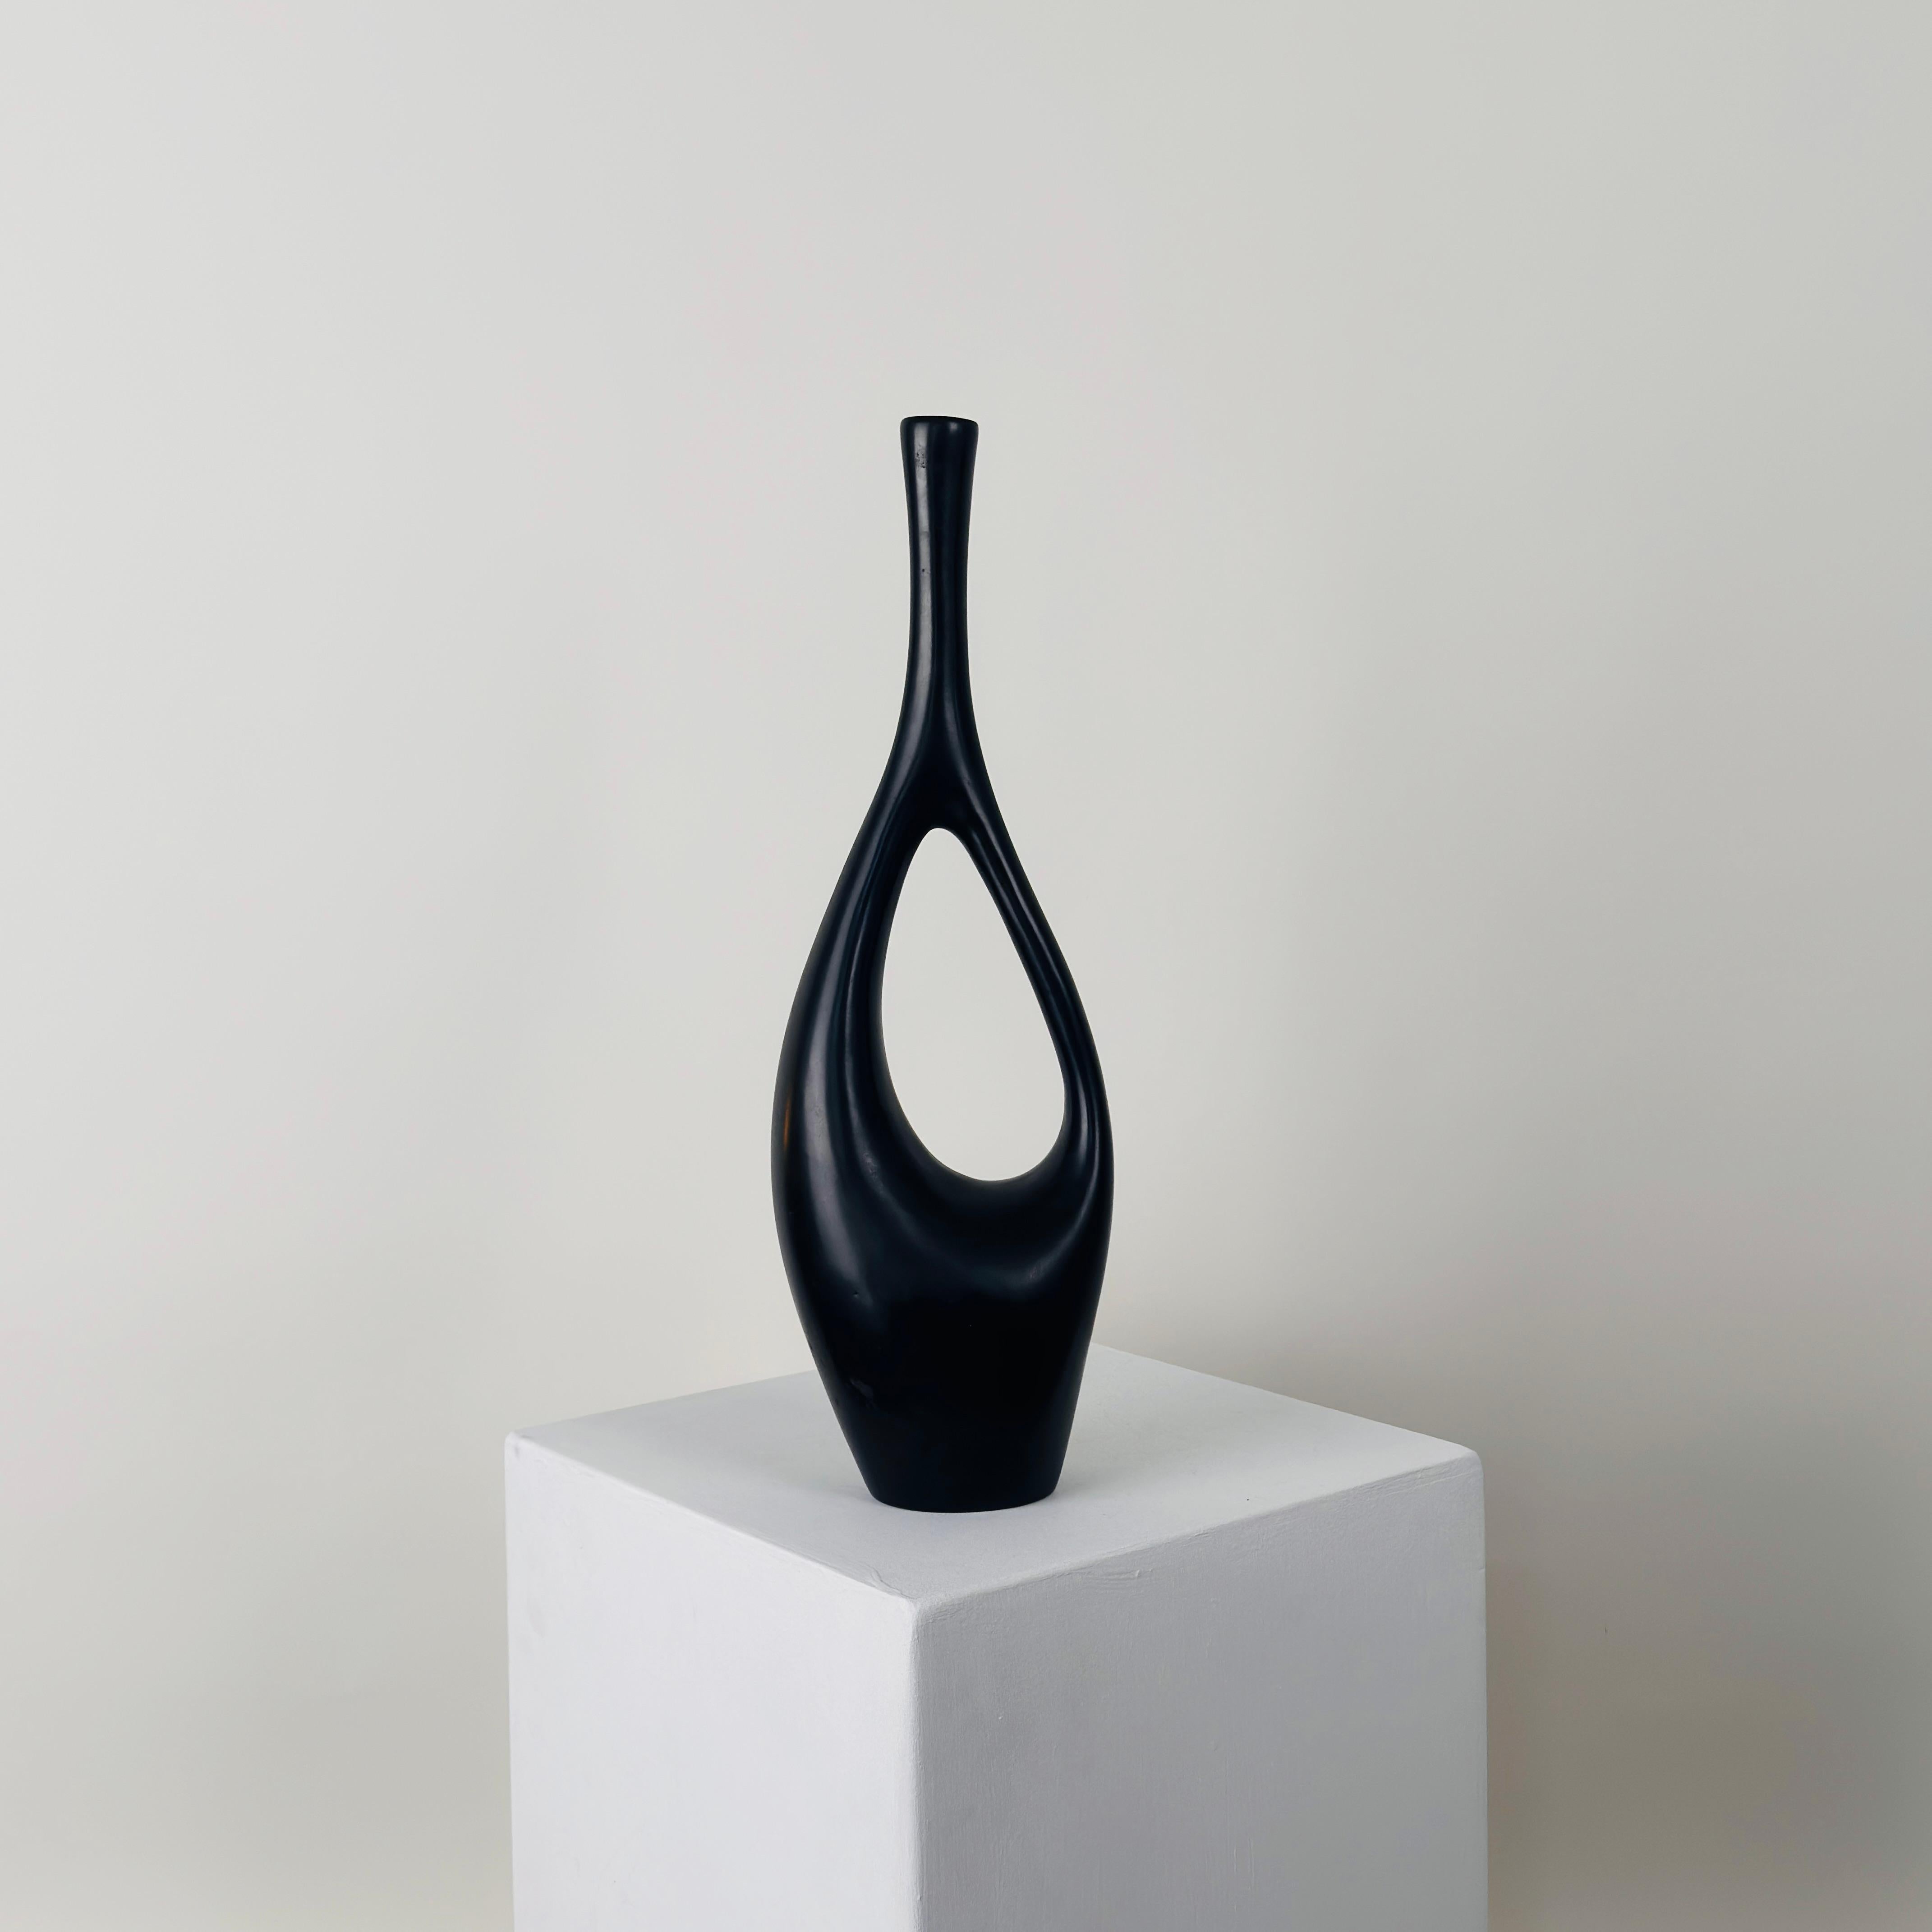 French Large soliflore vase with black ceramic handle by Jean André Doucin, circa 1950.